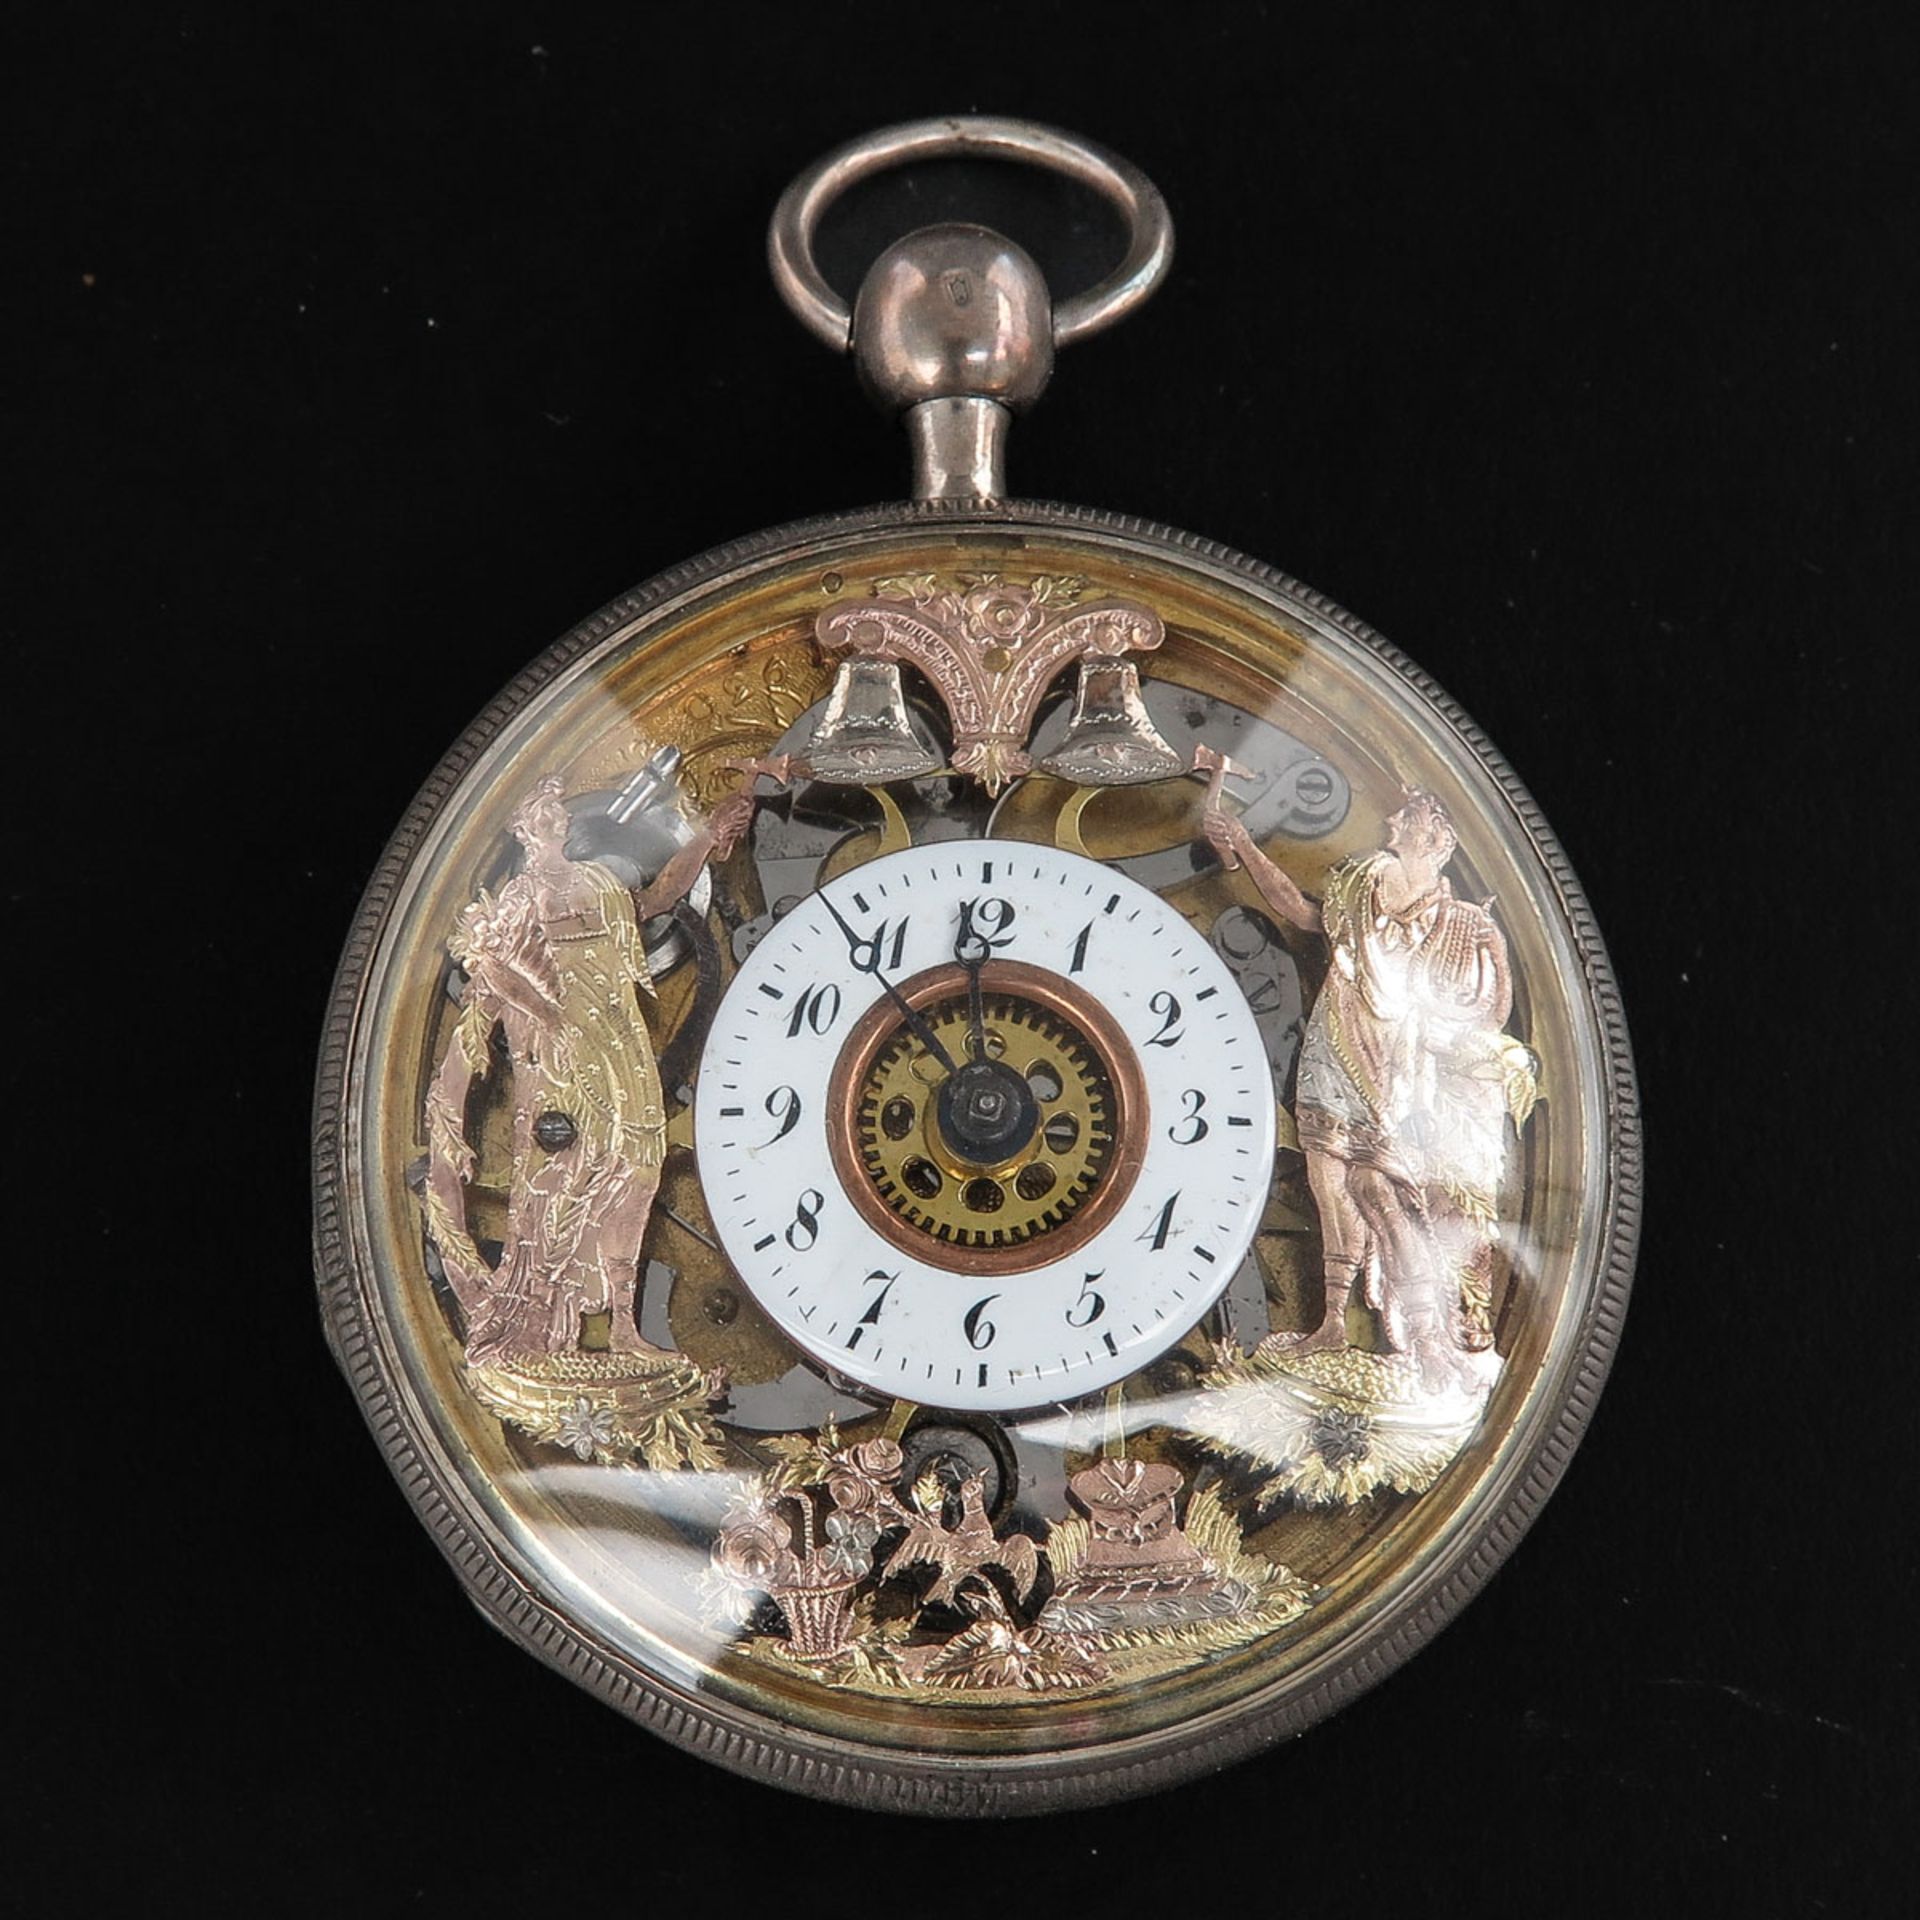 A Romilly and Company Pocket Watch Circa 1780